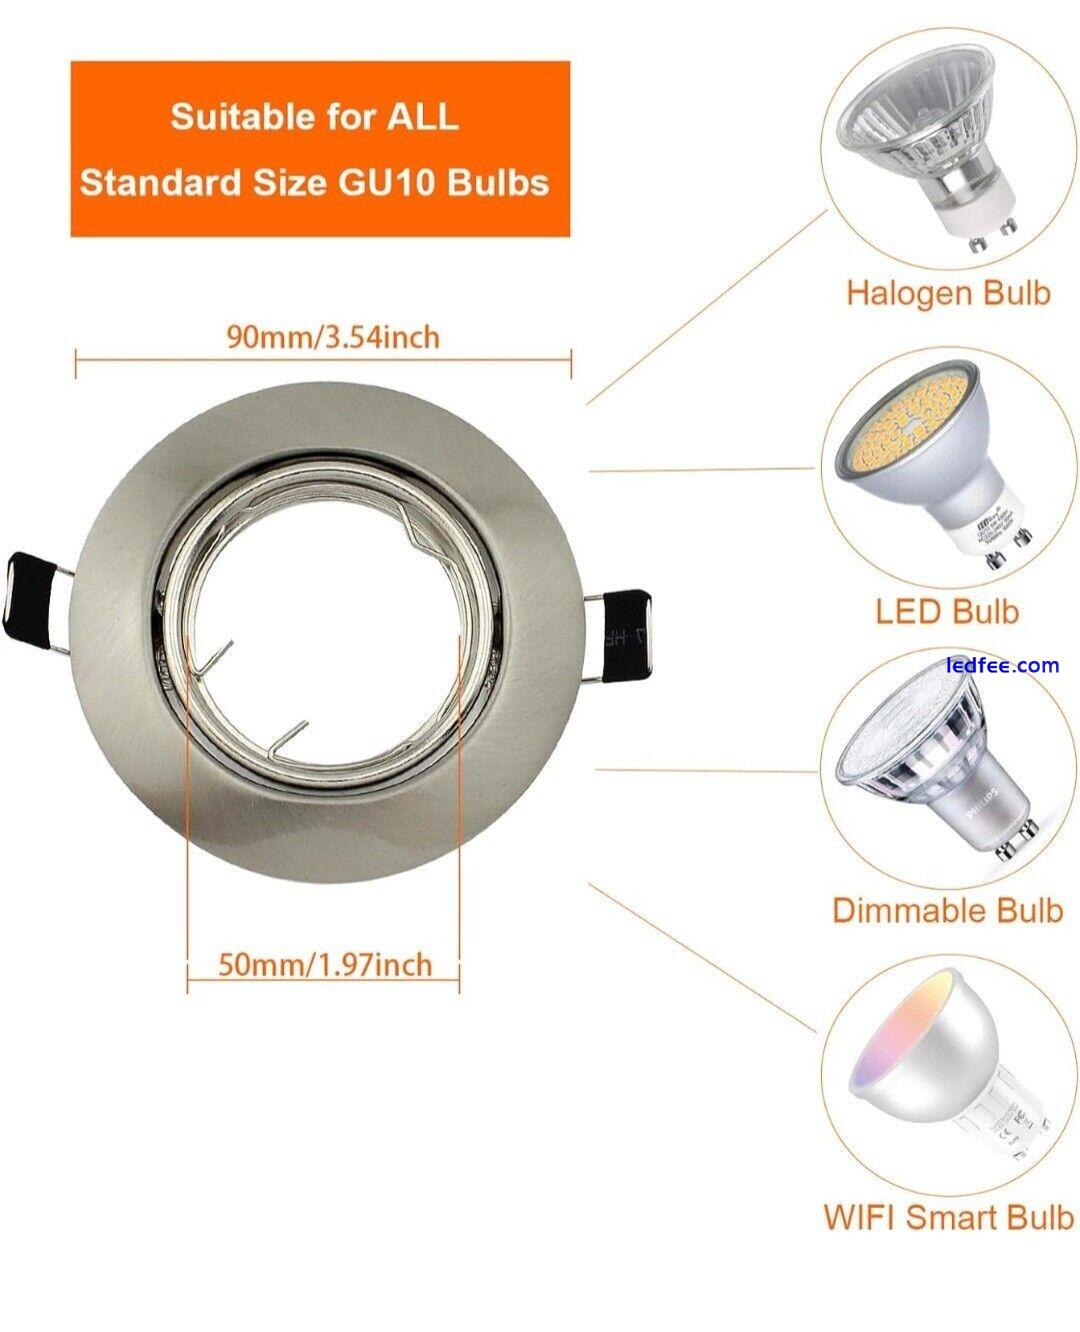 10x LED Recessed Ceiling Downlights GU10 Spotlights Round Fixed Light Fitting 1 